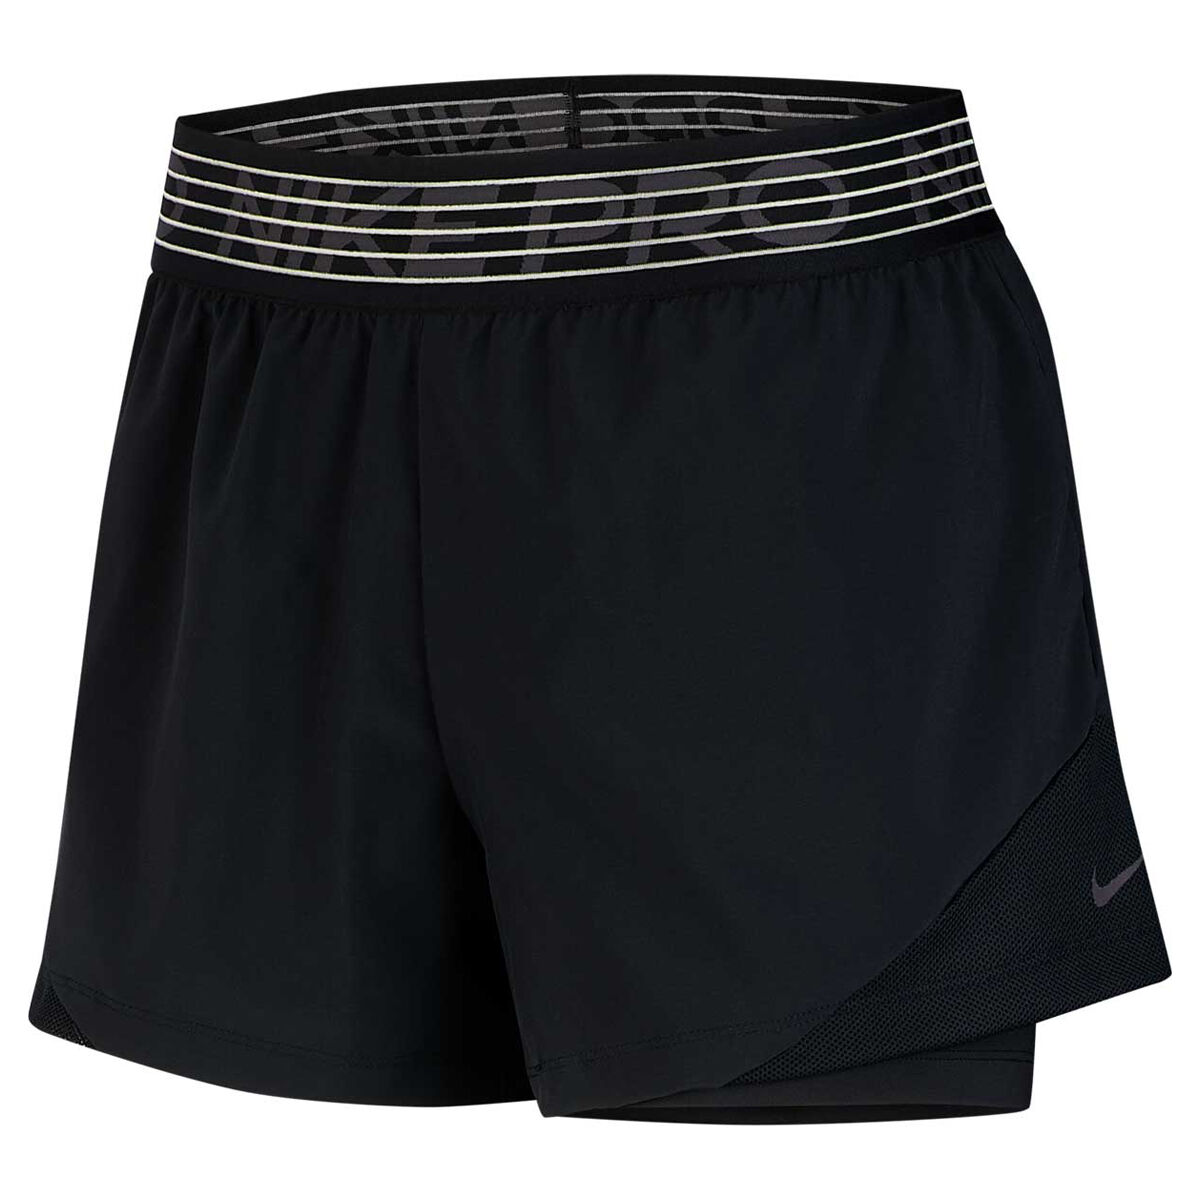 nike training flex 2 in 1 shorts in black and pink